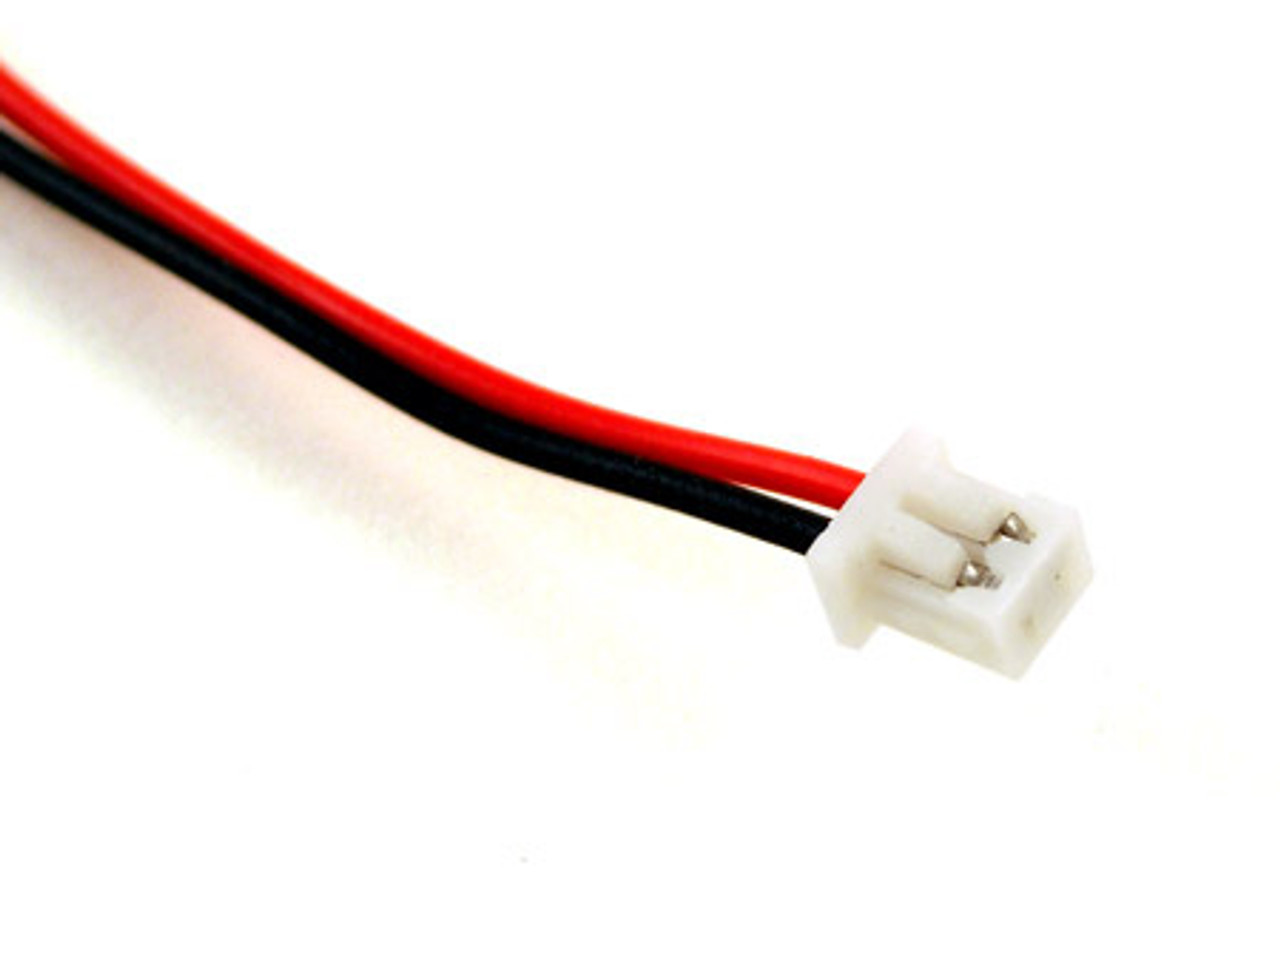 xt60 connector battery side